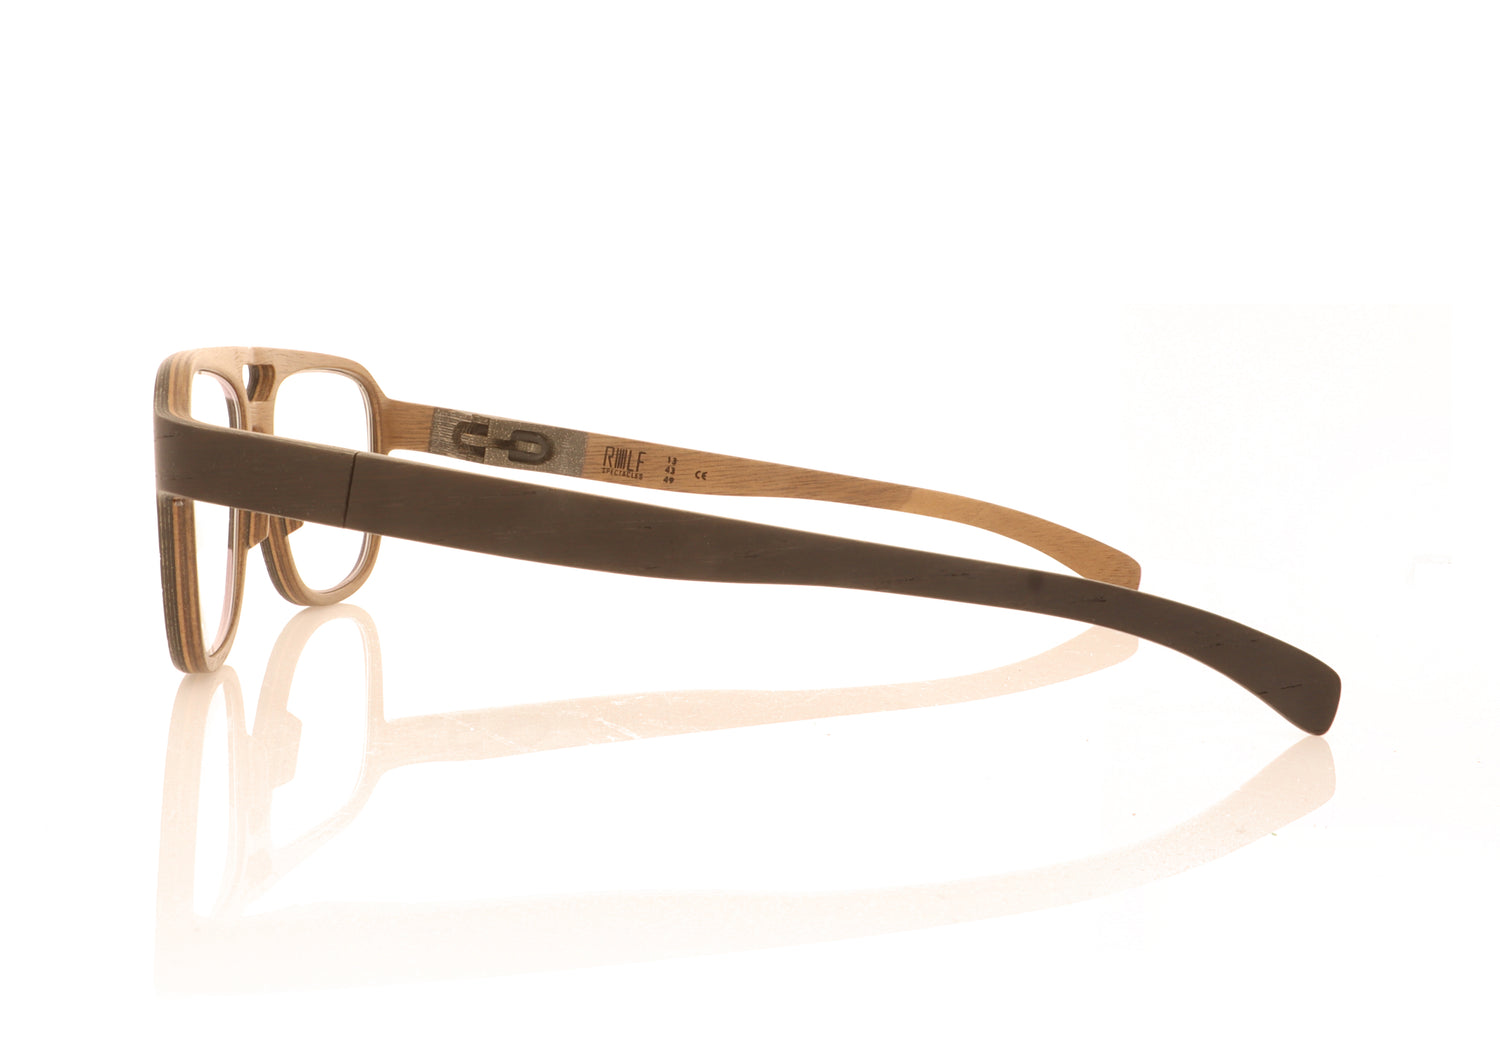 ROLF Spectacles Catalina 93 Brown Glasses - Side